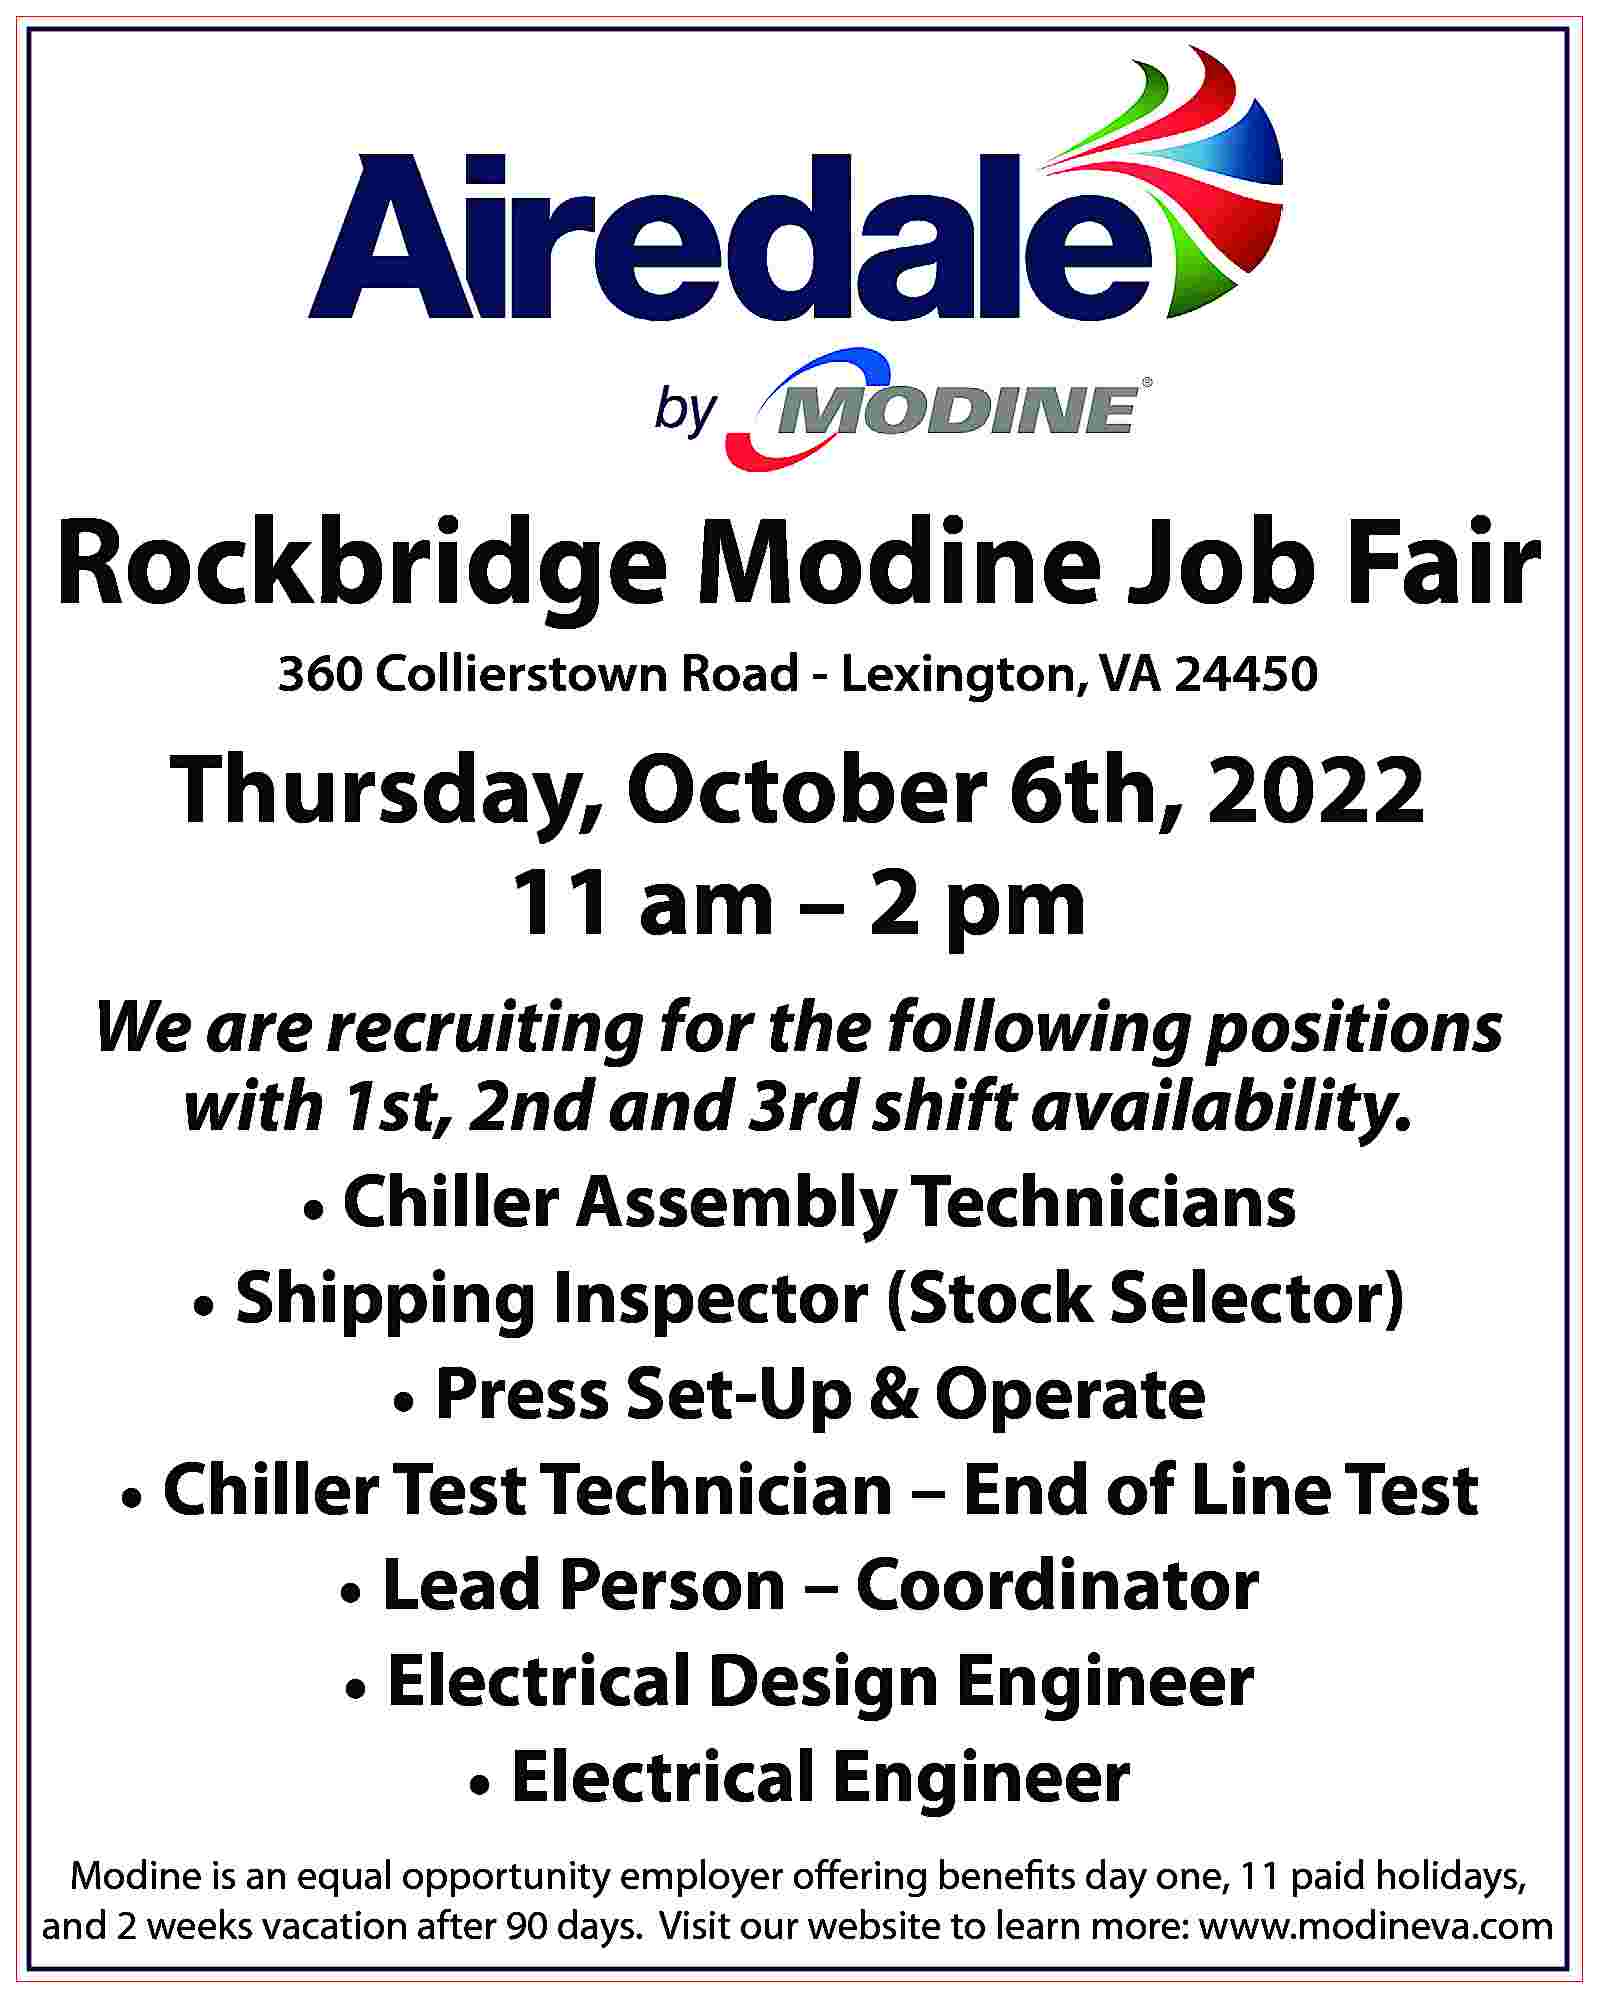 Rockbridge Modine Job Fair 360  Rockbridge Modine Job Fair 360 Collierstown Road - Lexington, VA 24450 Thursday, October 6th, 2022 11 am – 2 pm We are recruiting for the following positions with 1st, 2nd and 3rd shift availability. • Chiller Assembly Technicians • Shipping Inspector (Stock Selector) • Press Set-Up & Operate • Chiller Test Technician – End of Line Test • Lead Person – Coordinator • Electrical Design Engineer • Electrical Engineer Modine is an equal opportunity employer offering benefits day one, 11 paid holidays, and 2 weeks vacation after 90 days. Visit our website to learn more: www.modineva.com